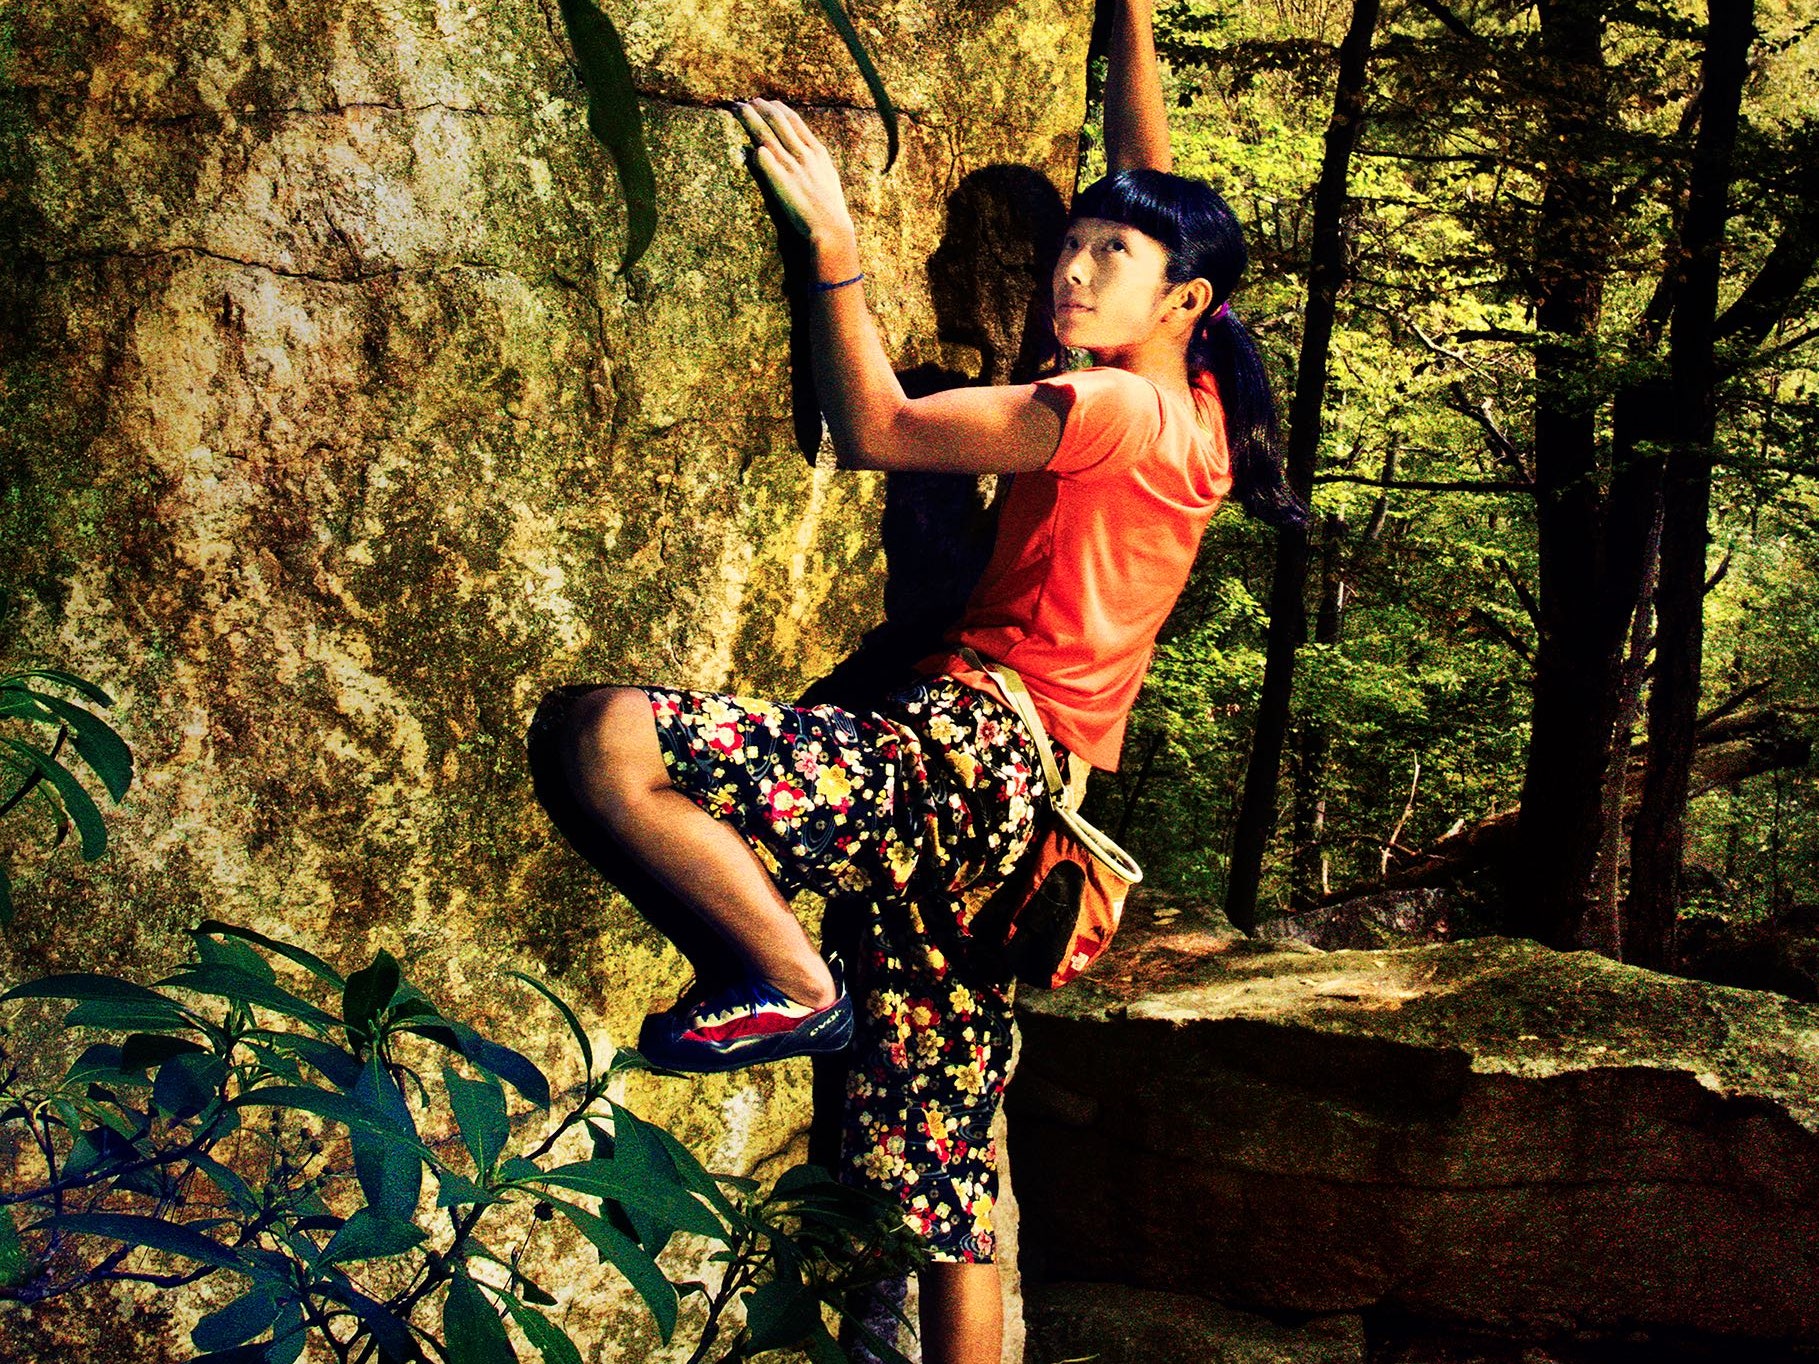 ajaan khan recommends sex while rock climbing pic